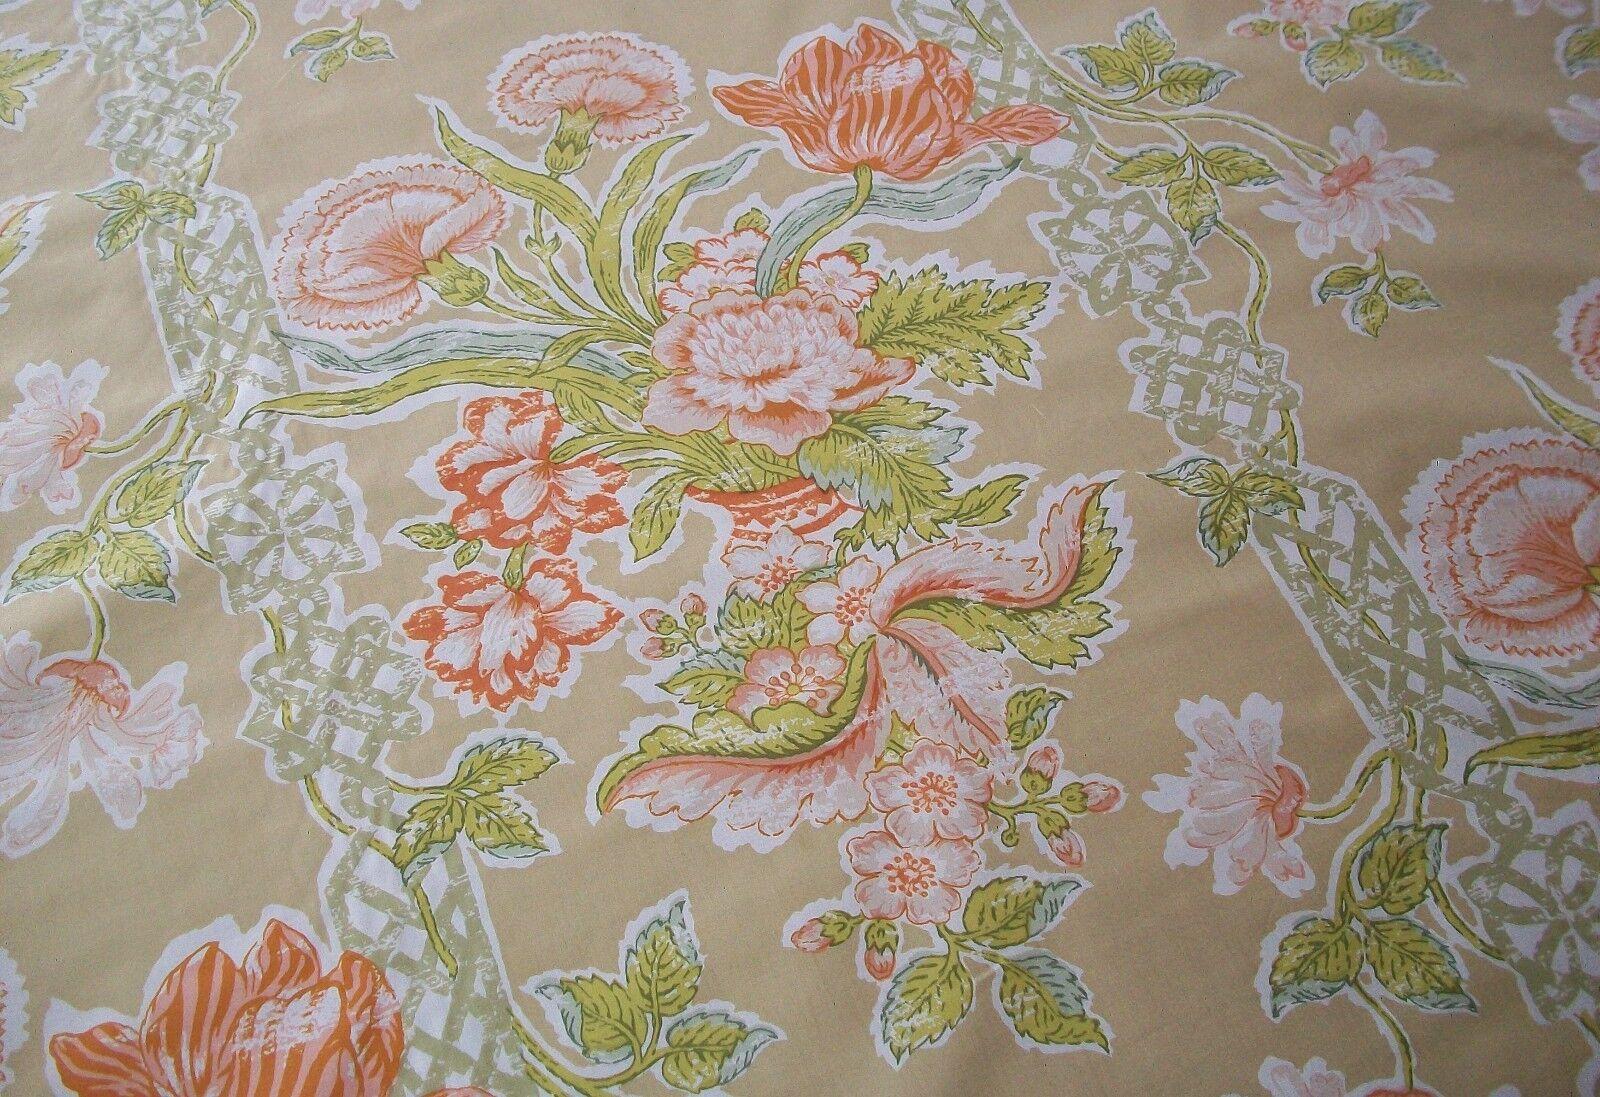 S.M. HEXTER CO. - 'Hirado' - mid-century hand printed fabric - very fine quality - 100% glazed cotton - suitable for crafts/pillows/window coverings/light upholstery - United States - circa 1950's.

Excellent condition - raw/cut edges - folds and